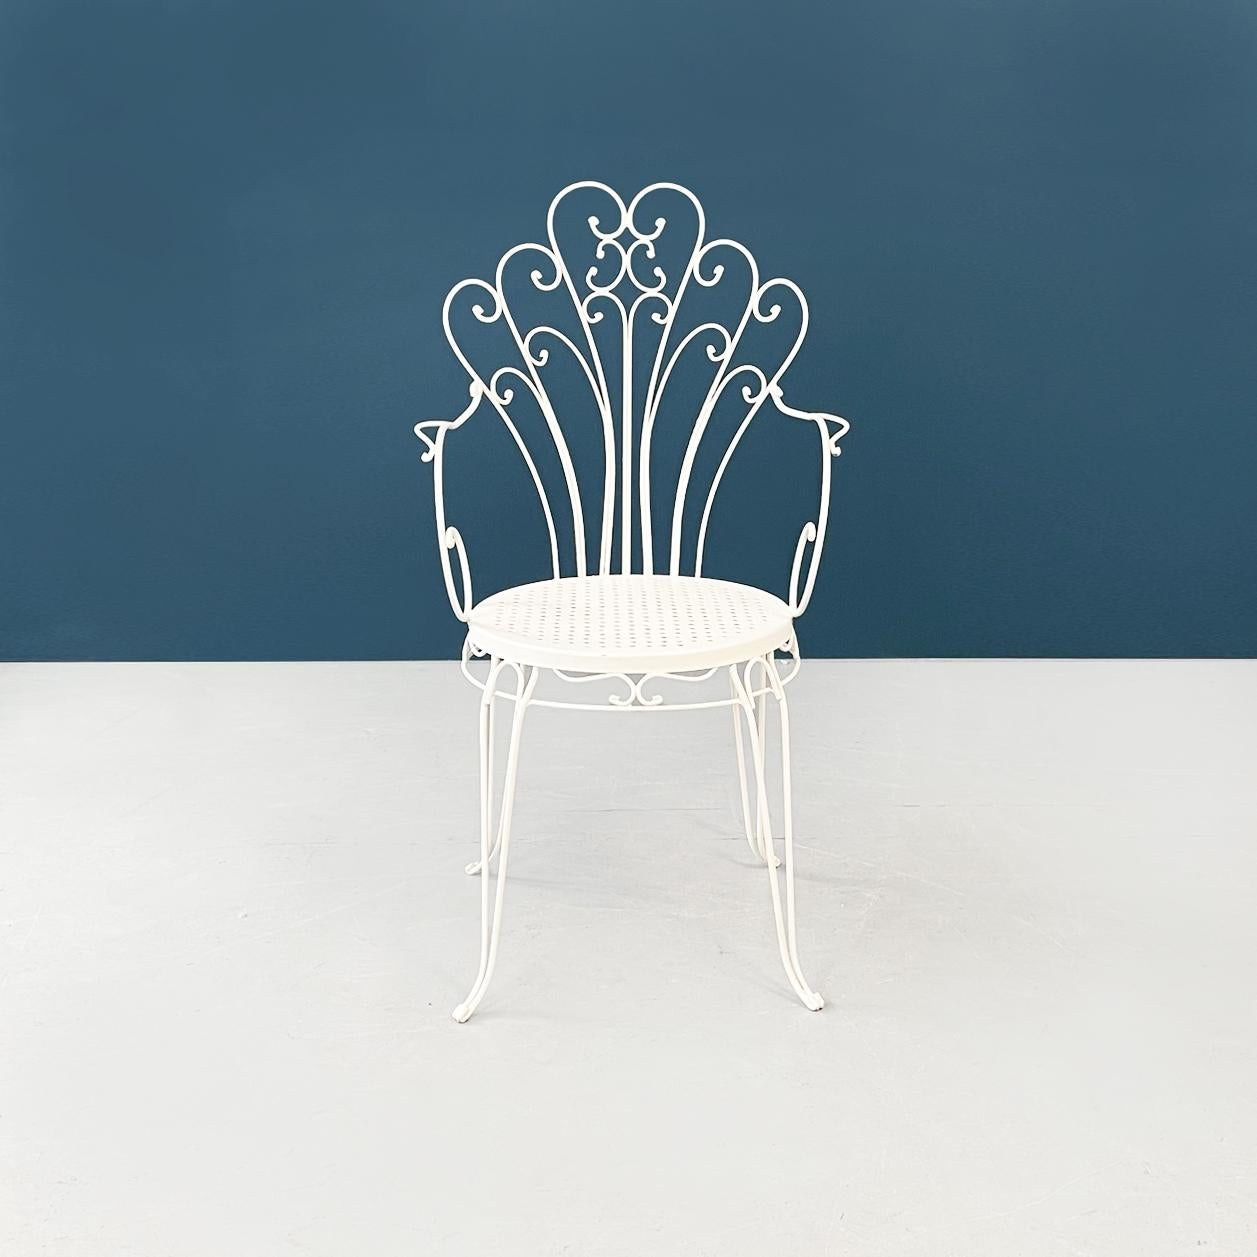 Italian mid-century Garden chairs in white wrought iron with curls, 1960s
Set of 4 garden chairs in white painted wrought iron. The round seat is perforated and decorated on the profile with curls. The back is slightly curved and has decorative